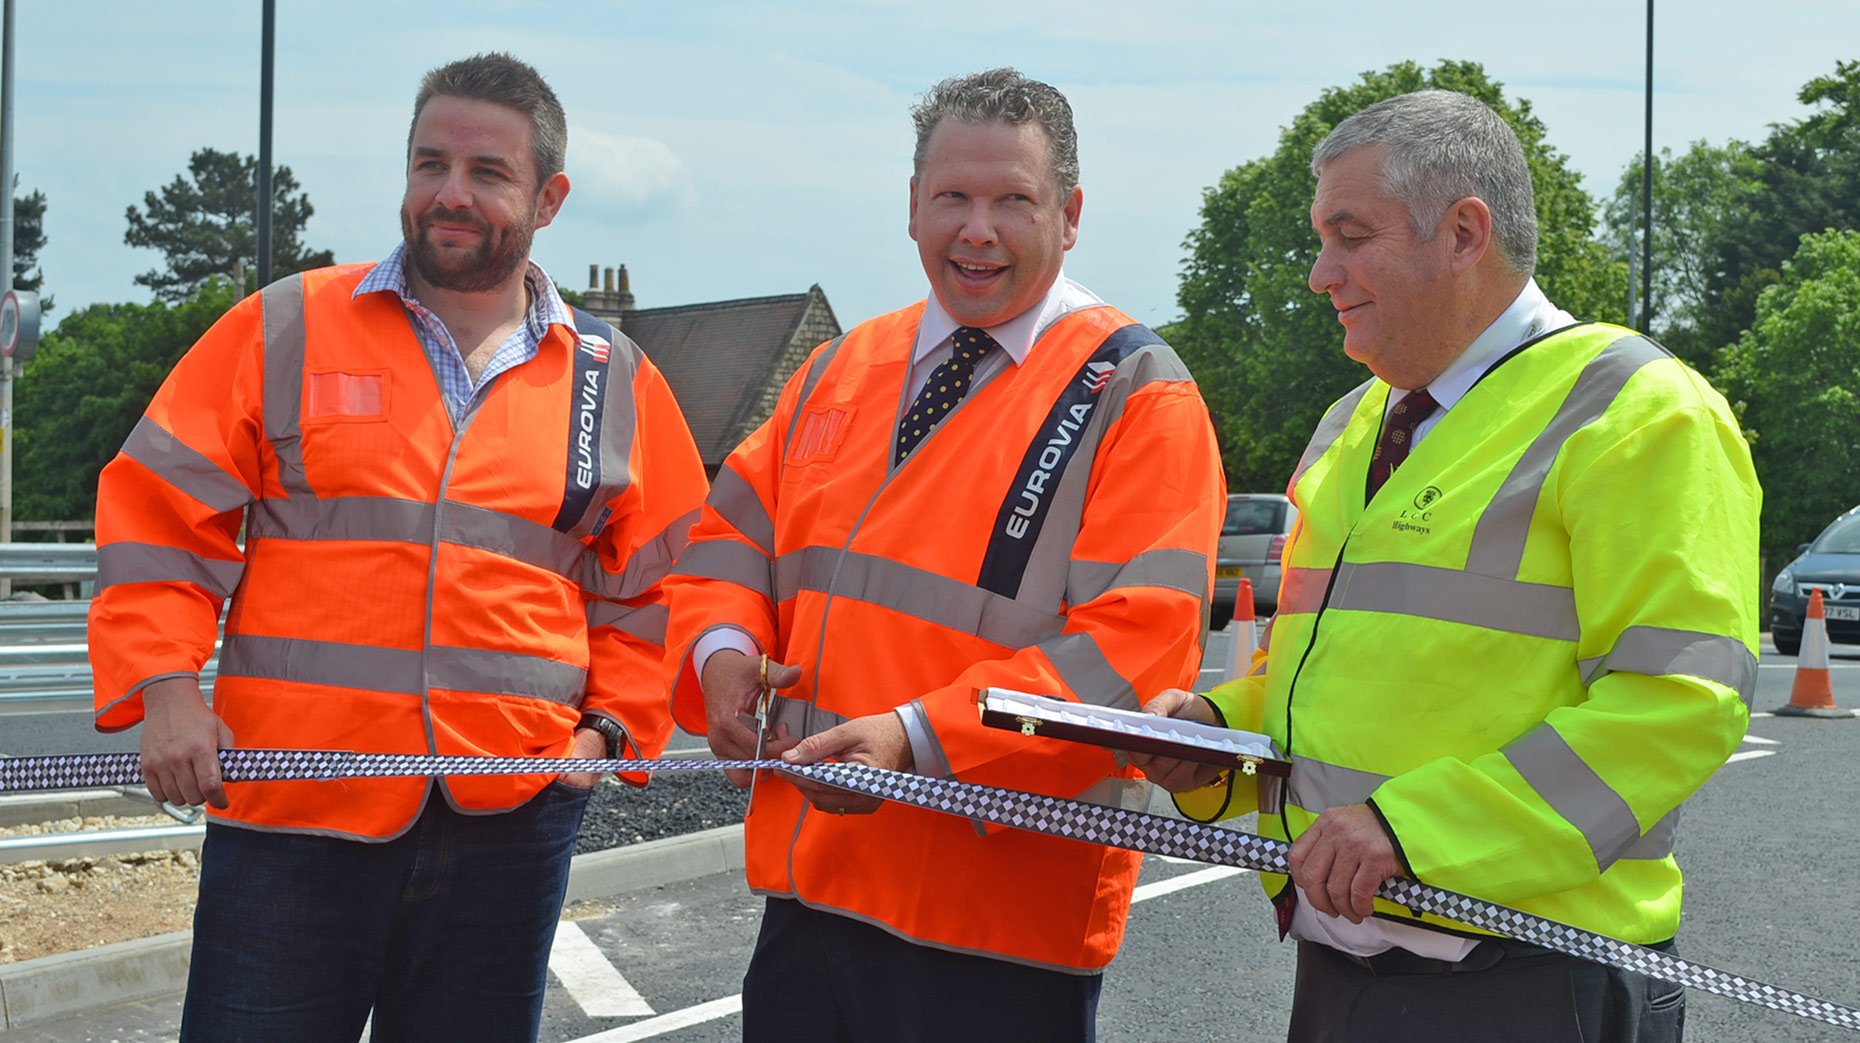 (L-R) Executive County Councillor for Transport Richard Davies, Lincoln MP Karl McCartney and Special Projects Manager Alan Airstrip cutting the ribbon and opening Canwick Road.